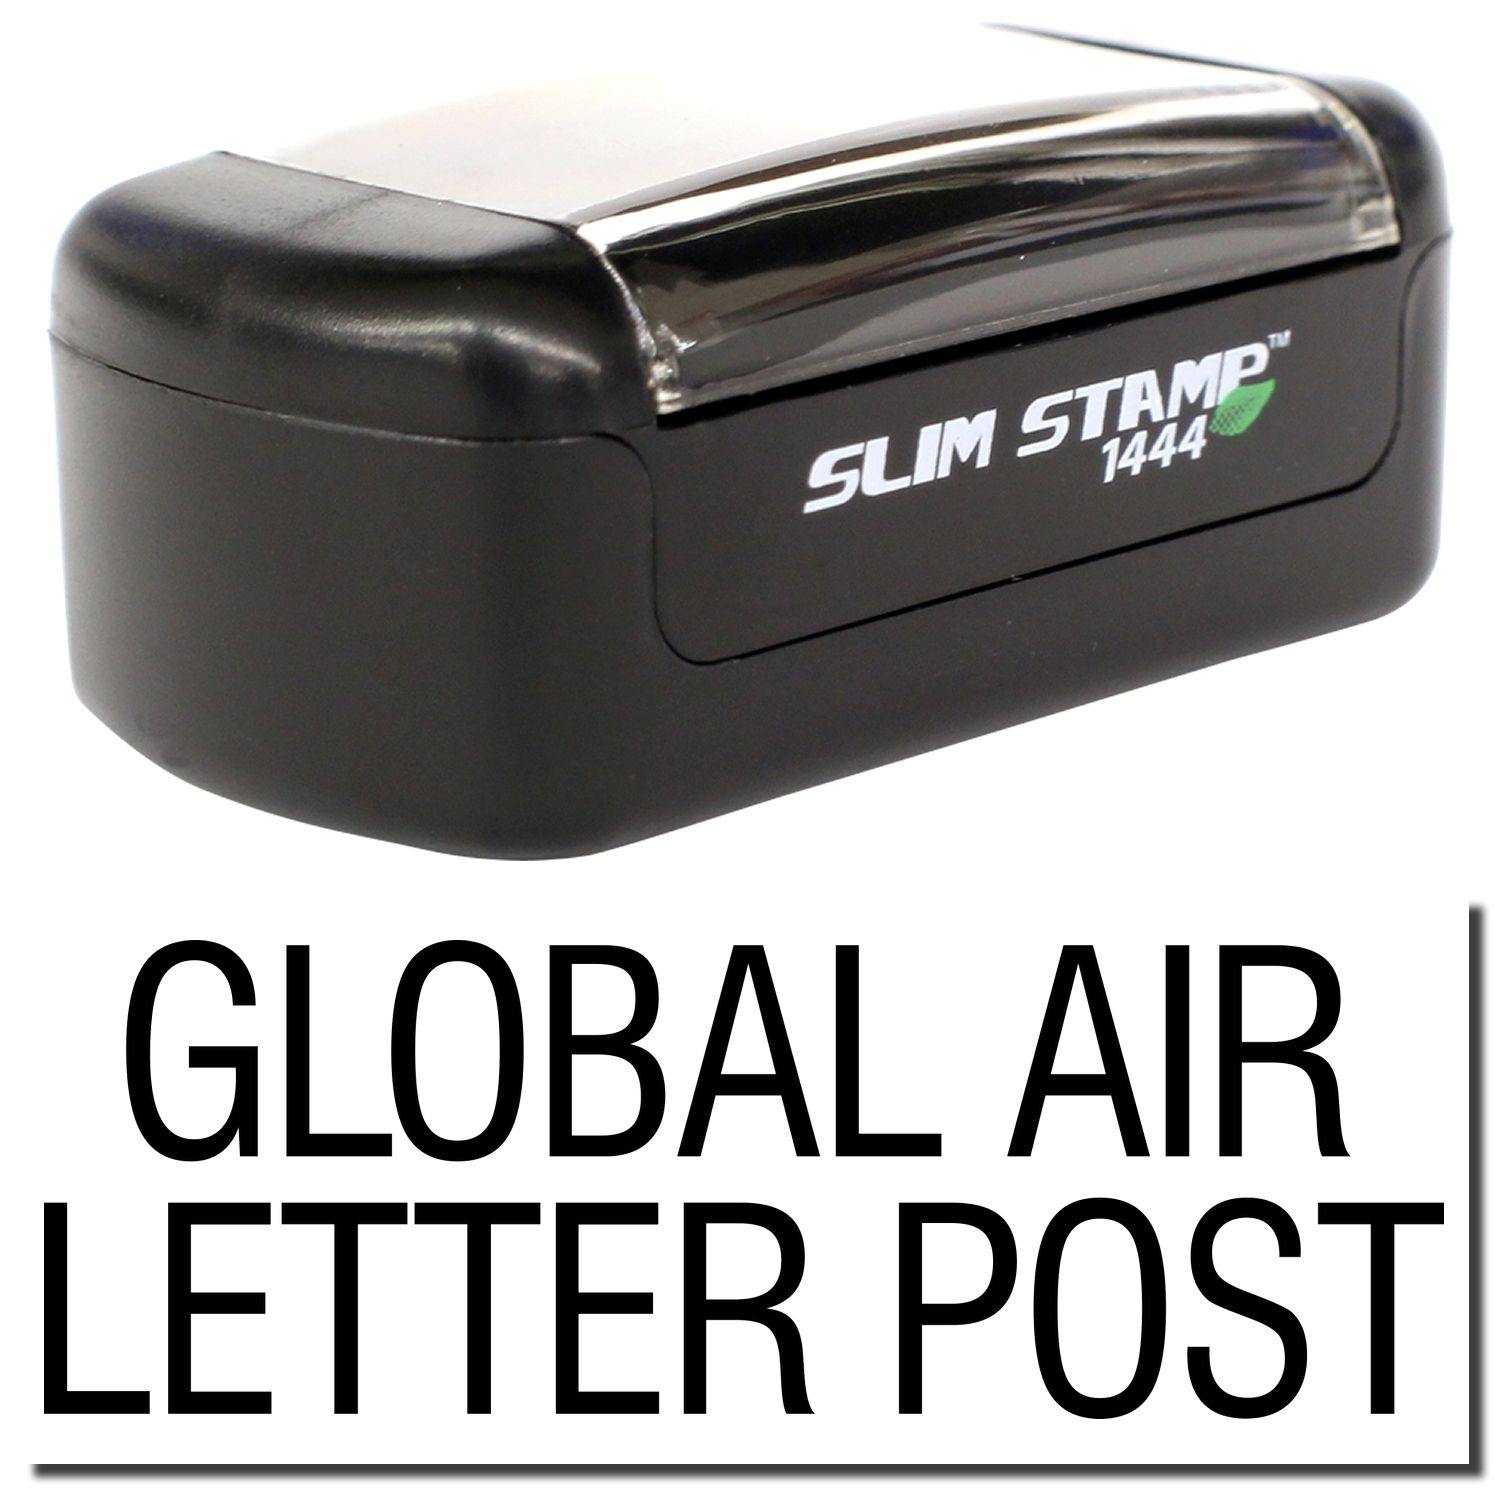 A stock office pre-inked stamp with a stamped image showing how the text "GLOBAL AIR LETTER POST" is displayed after stamping.